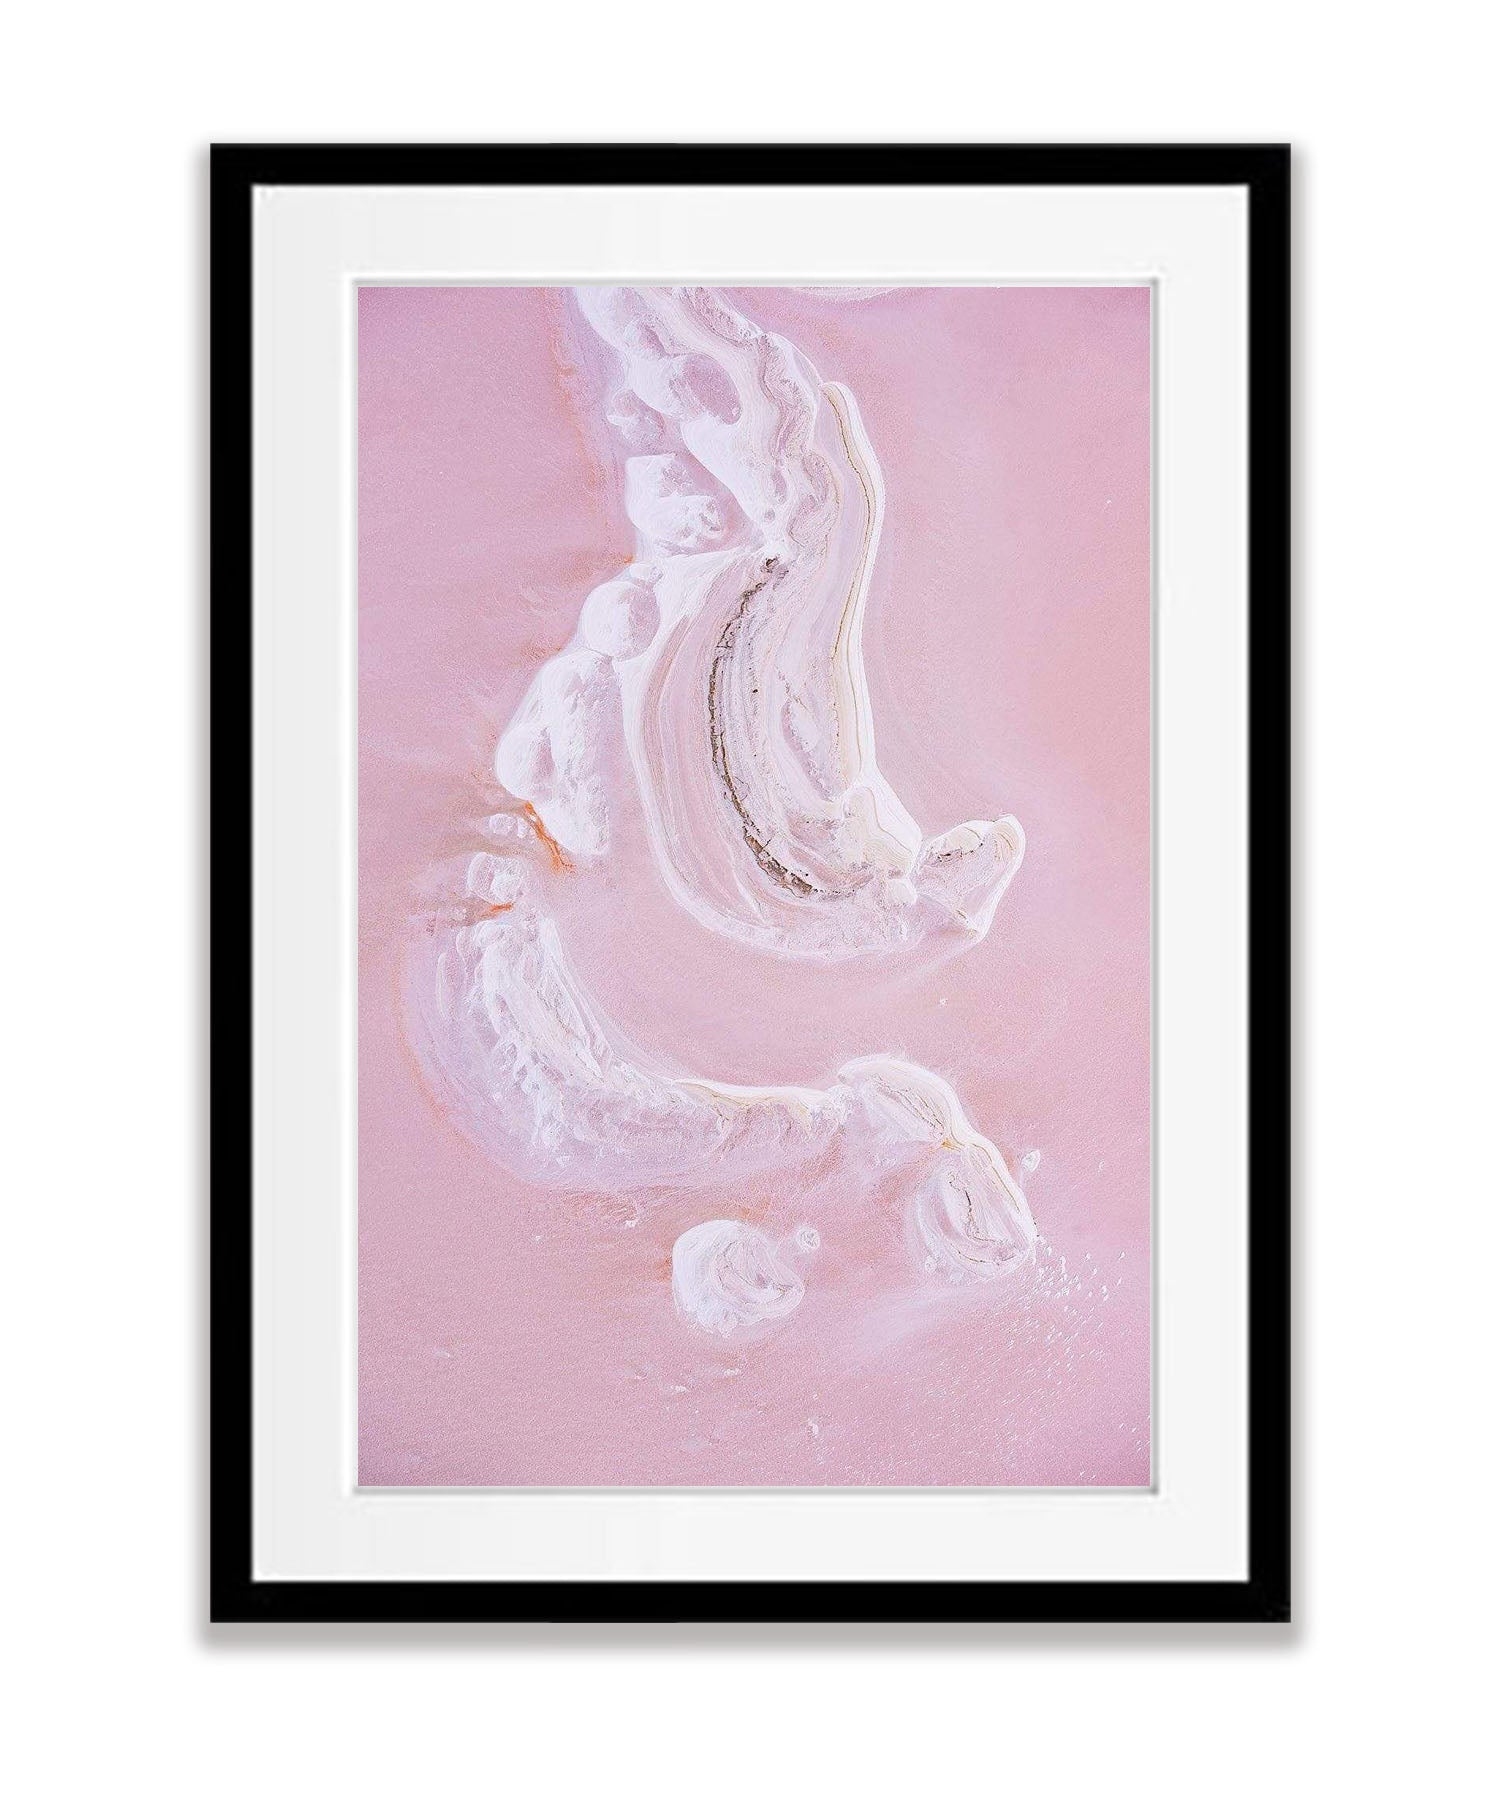 ARTWORK INSTOCK - 'Nature's Womb' - Available 150 x 120cms Mounted Print (ready to frame) in the gallery TODAY!